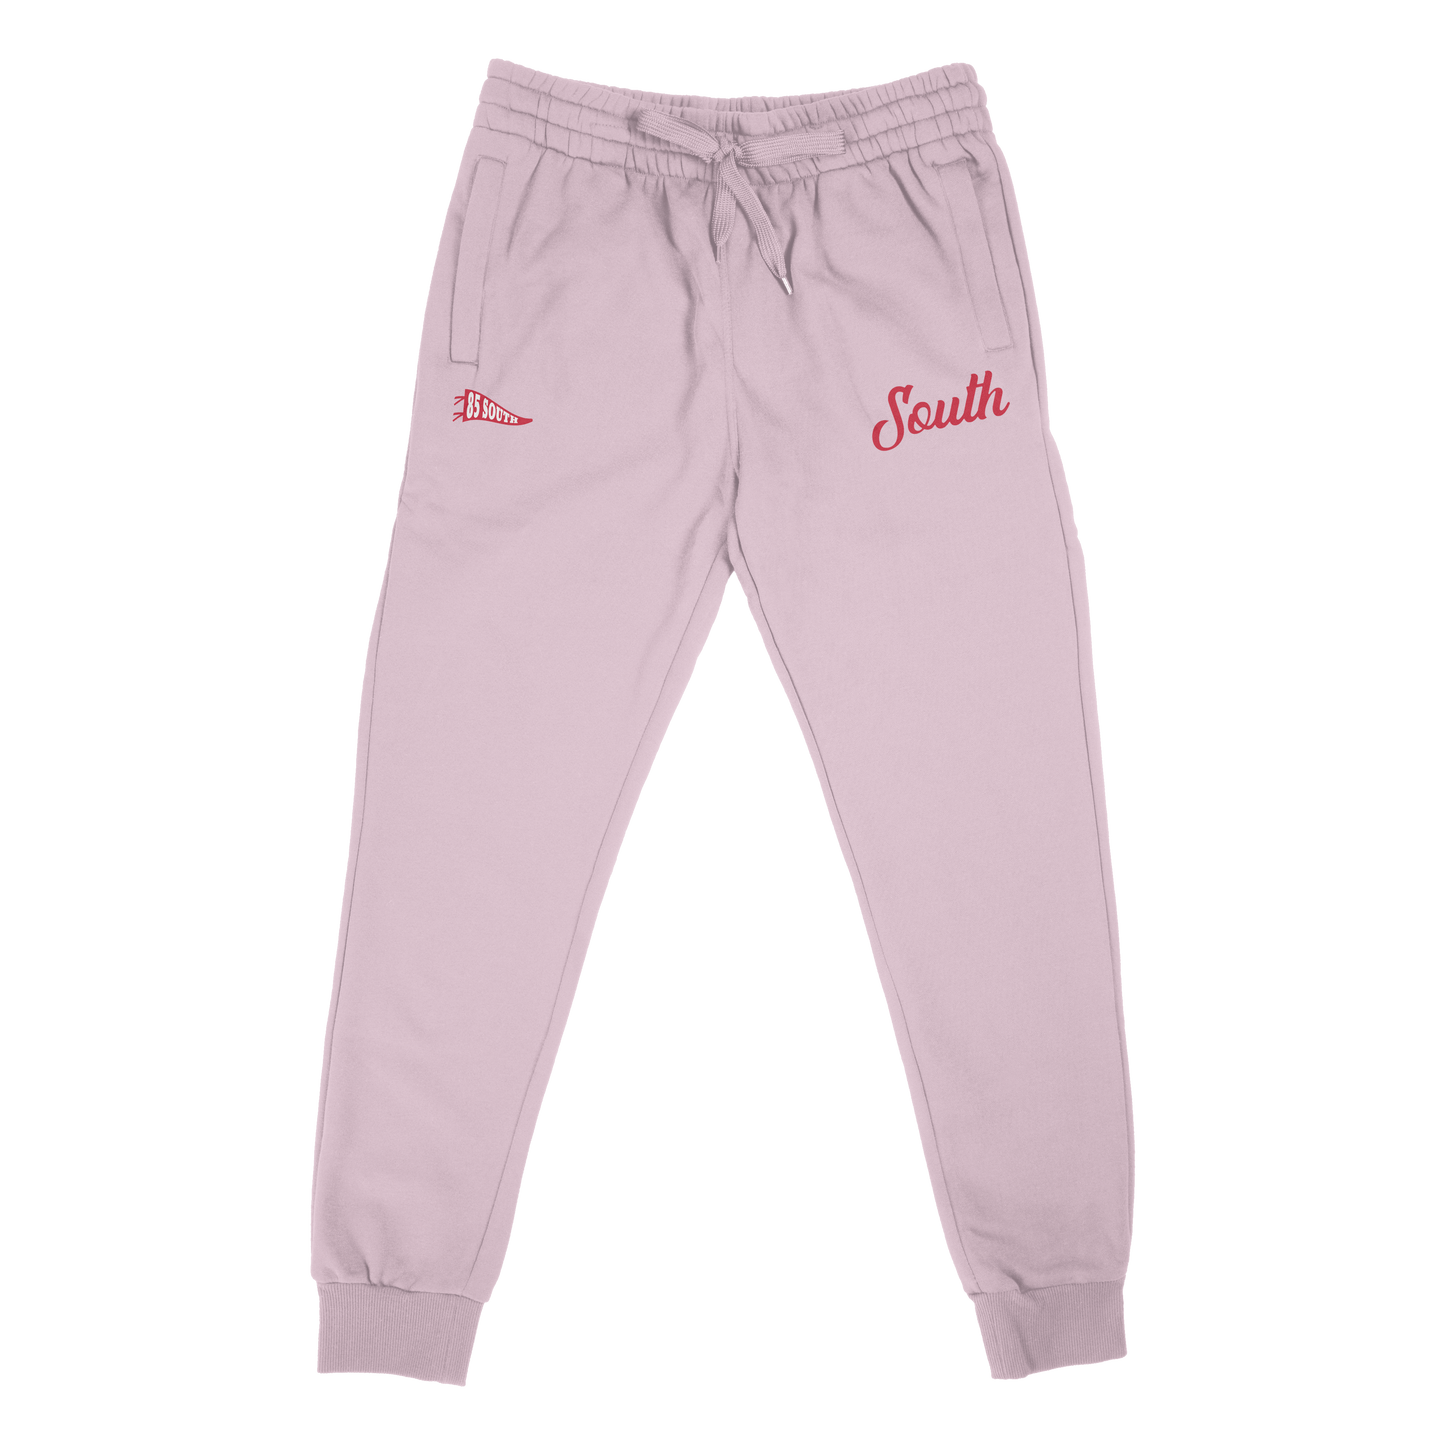 Exclusive Valentine's Day South Joggers - Blush Pink